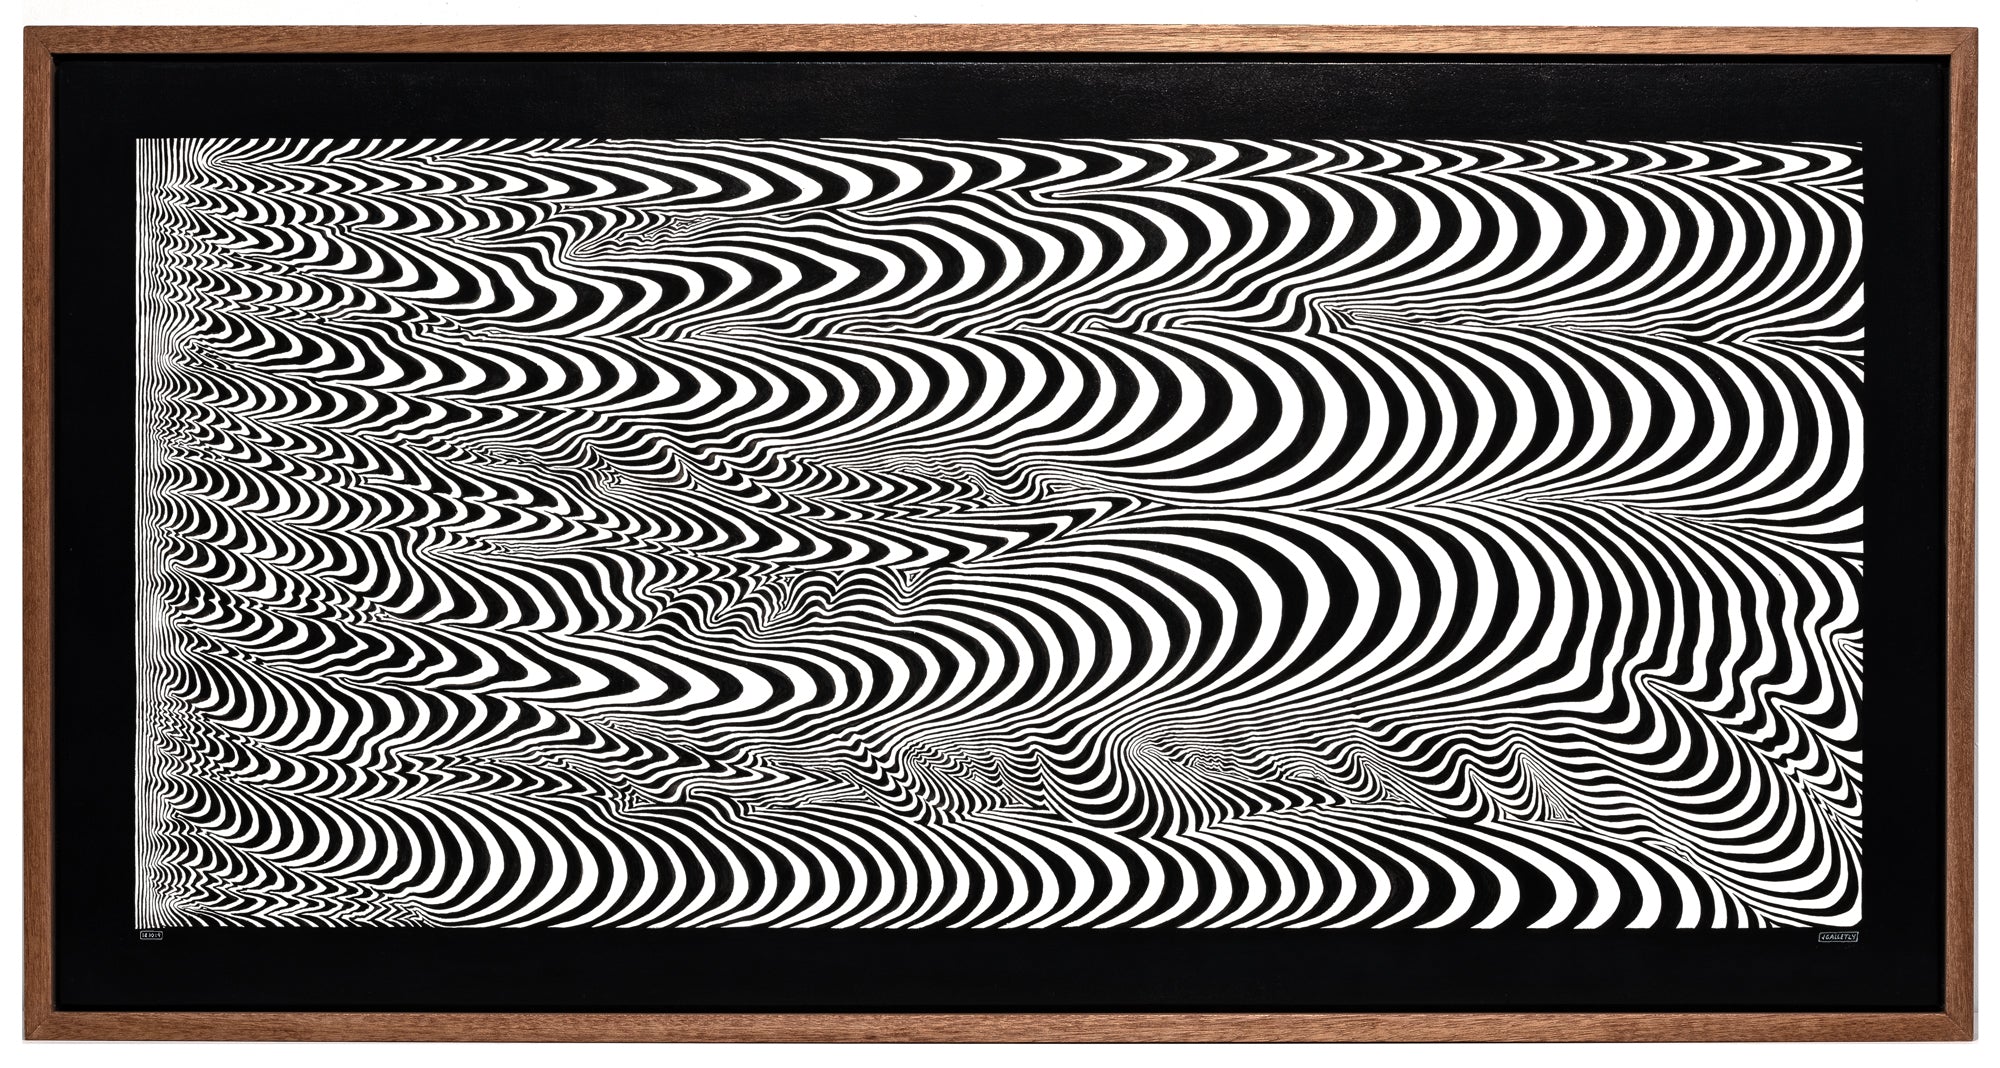 Josh Galletly Art, contemporary black and white line paintings, optical illuson psychedelic energy fields